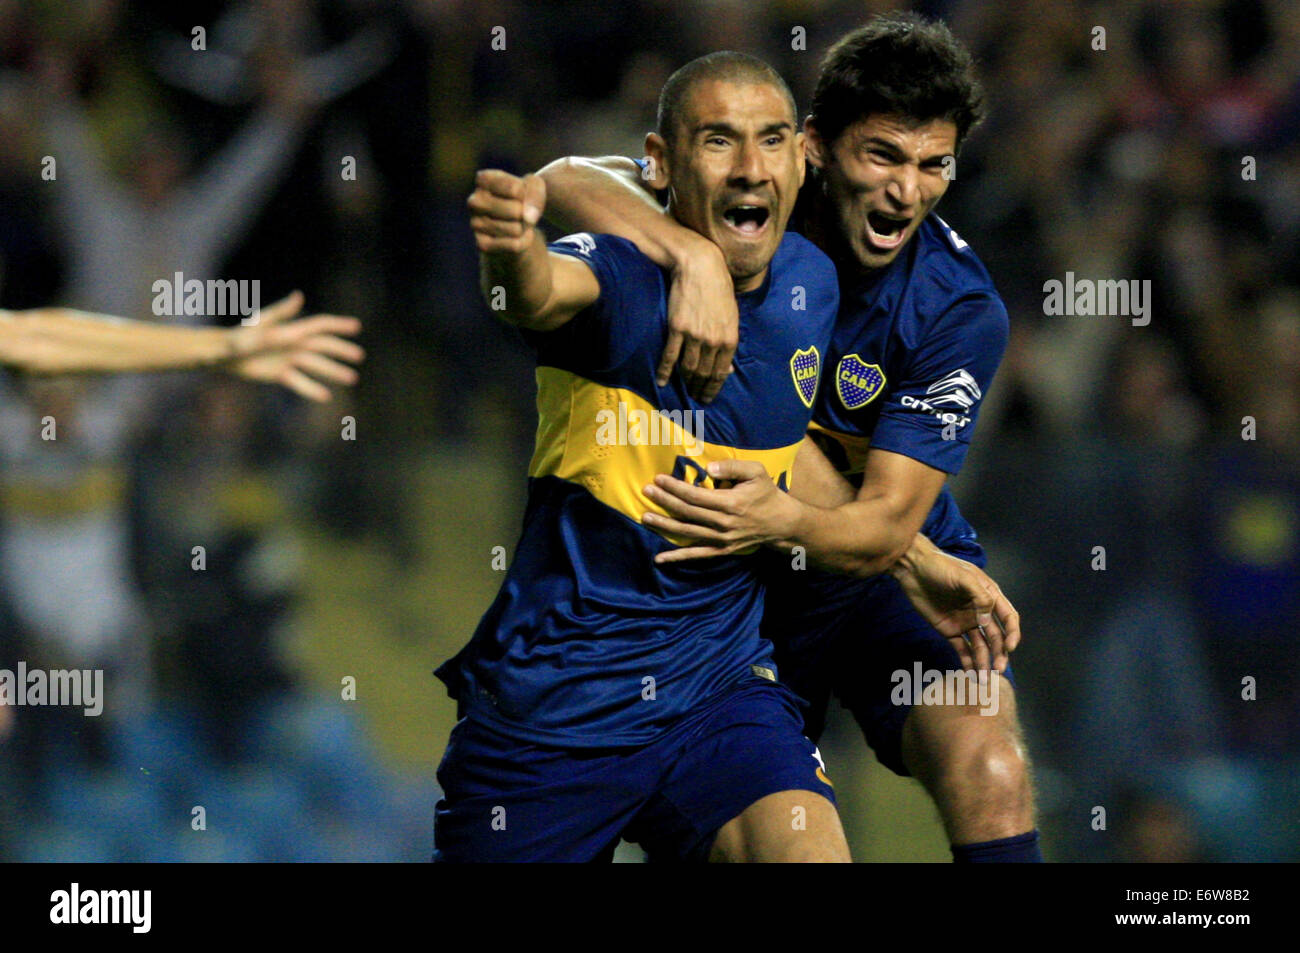 Buenos Aires, Argentina. 31st Aug, 2014. The player Daniel Diaz (L) of Boca Juniors, celebrates a scoring with his teammate Marcelo Meli (R), during the match of the Argentinean First Division Tournament against Velez Sarsfield, in the Alberto J. Armando Stadium, in Buenos Aires, Argentina, on Aug. 31, 2014. (Xinhua/Martin Zabala) (jp) (ah) Credit:  Xinhua/Alamy Live News Stock Photo